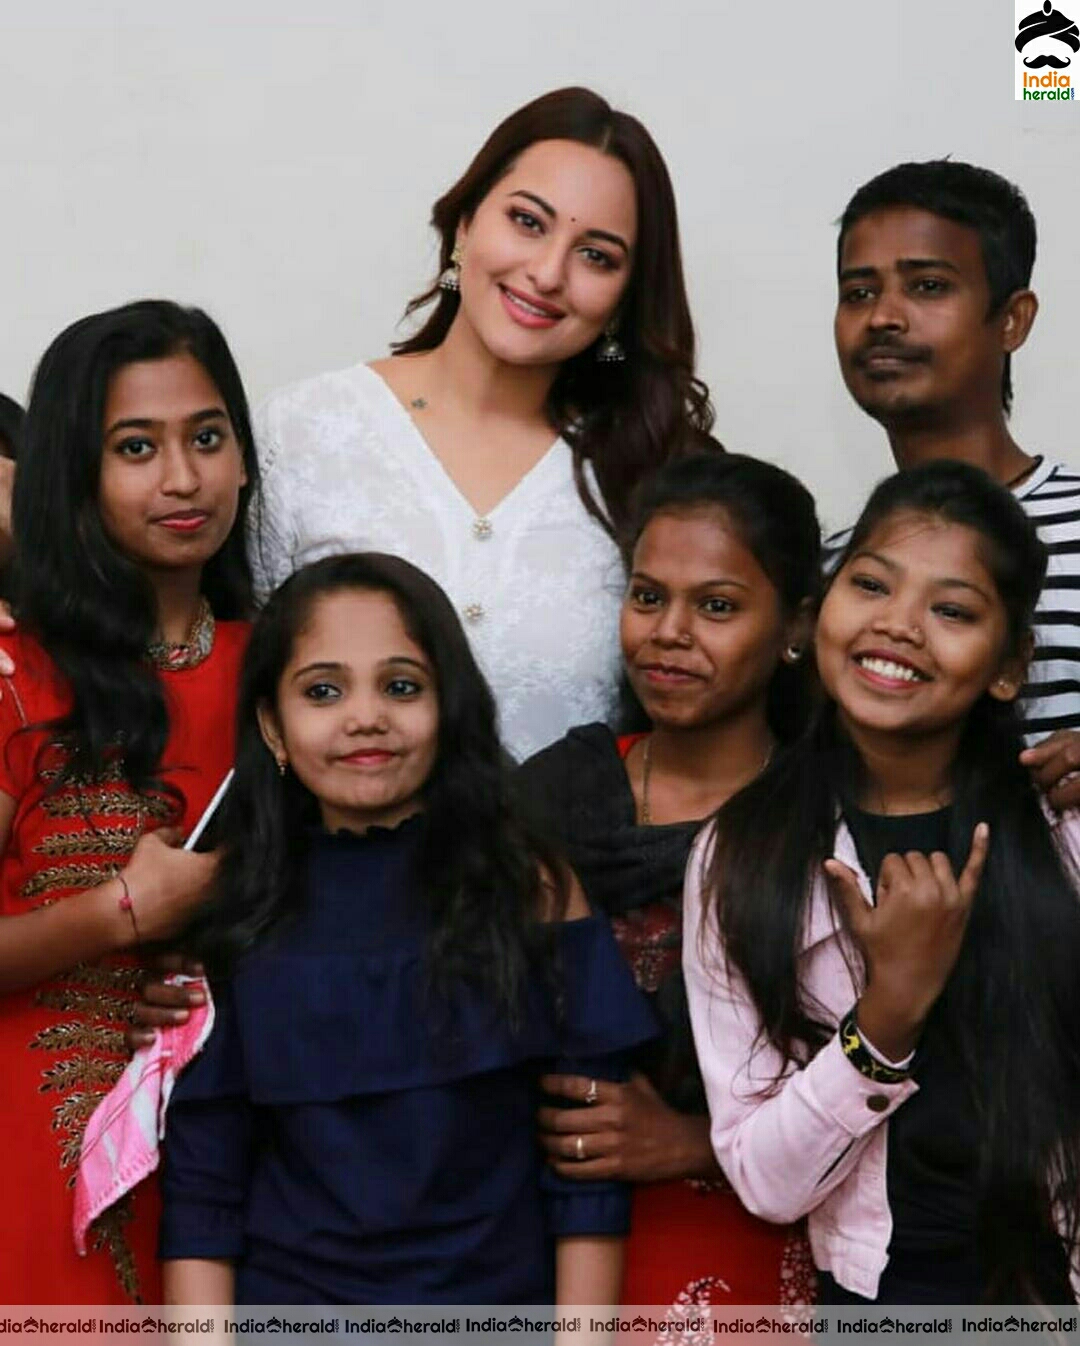 Sonakshi Sinha Bonded With Children At An NGO